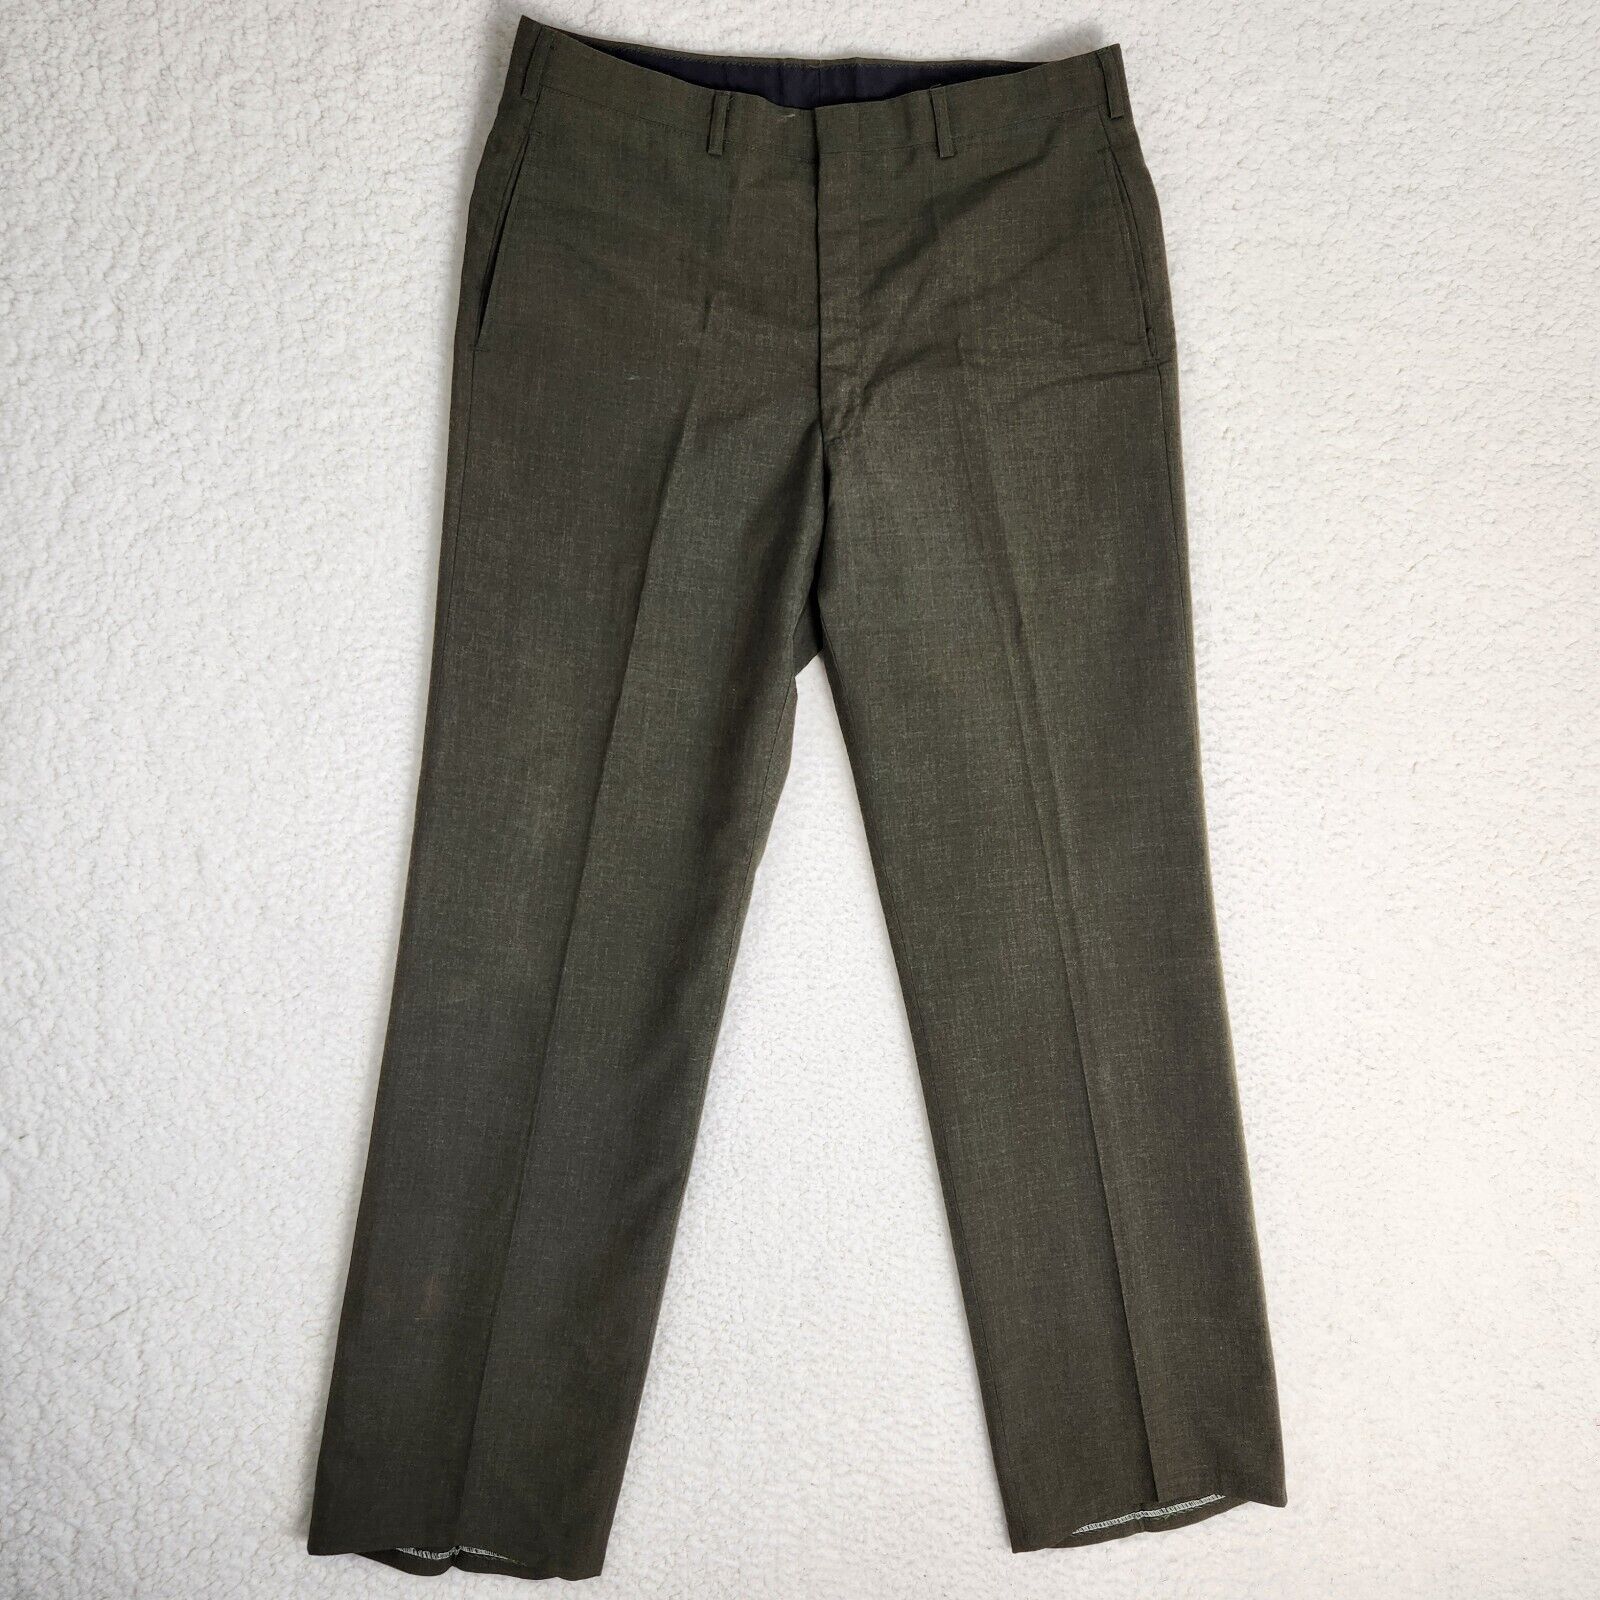 Vintage 80s Military Trousers Men's Size 34 Olive Polyester/Wool Tropical Pants